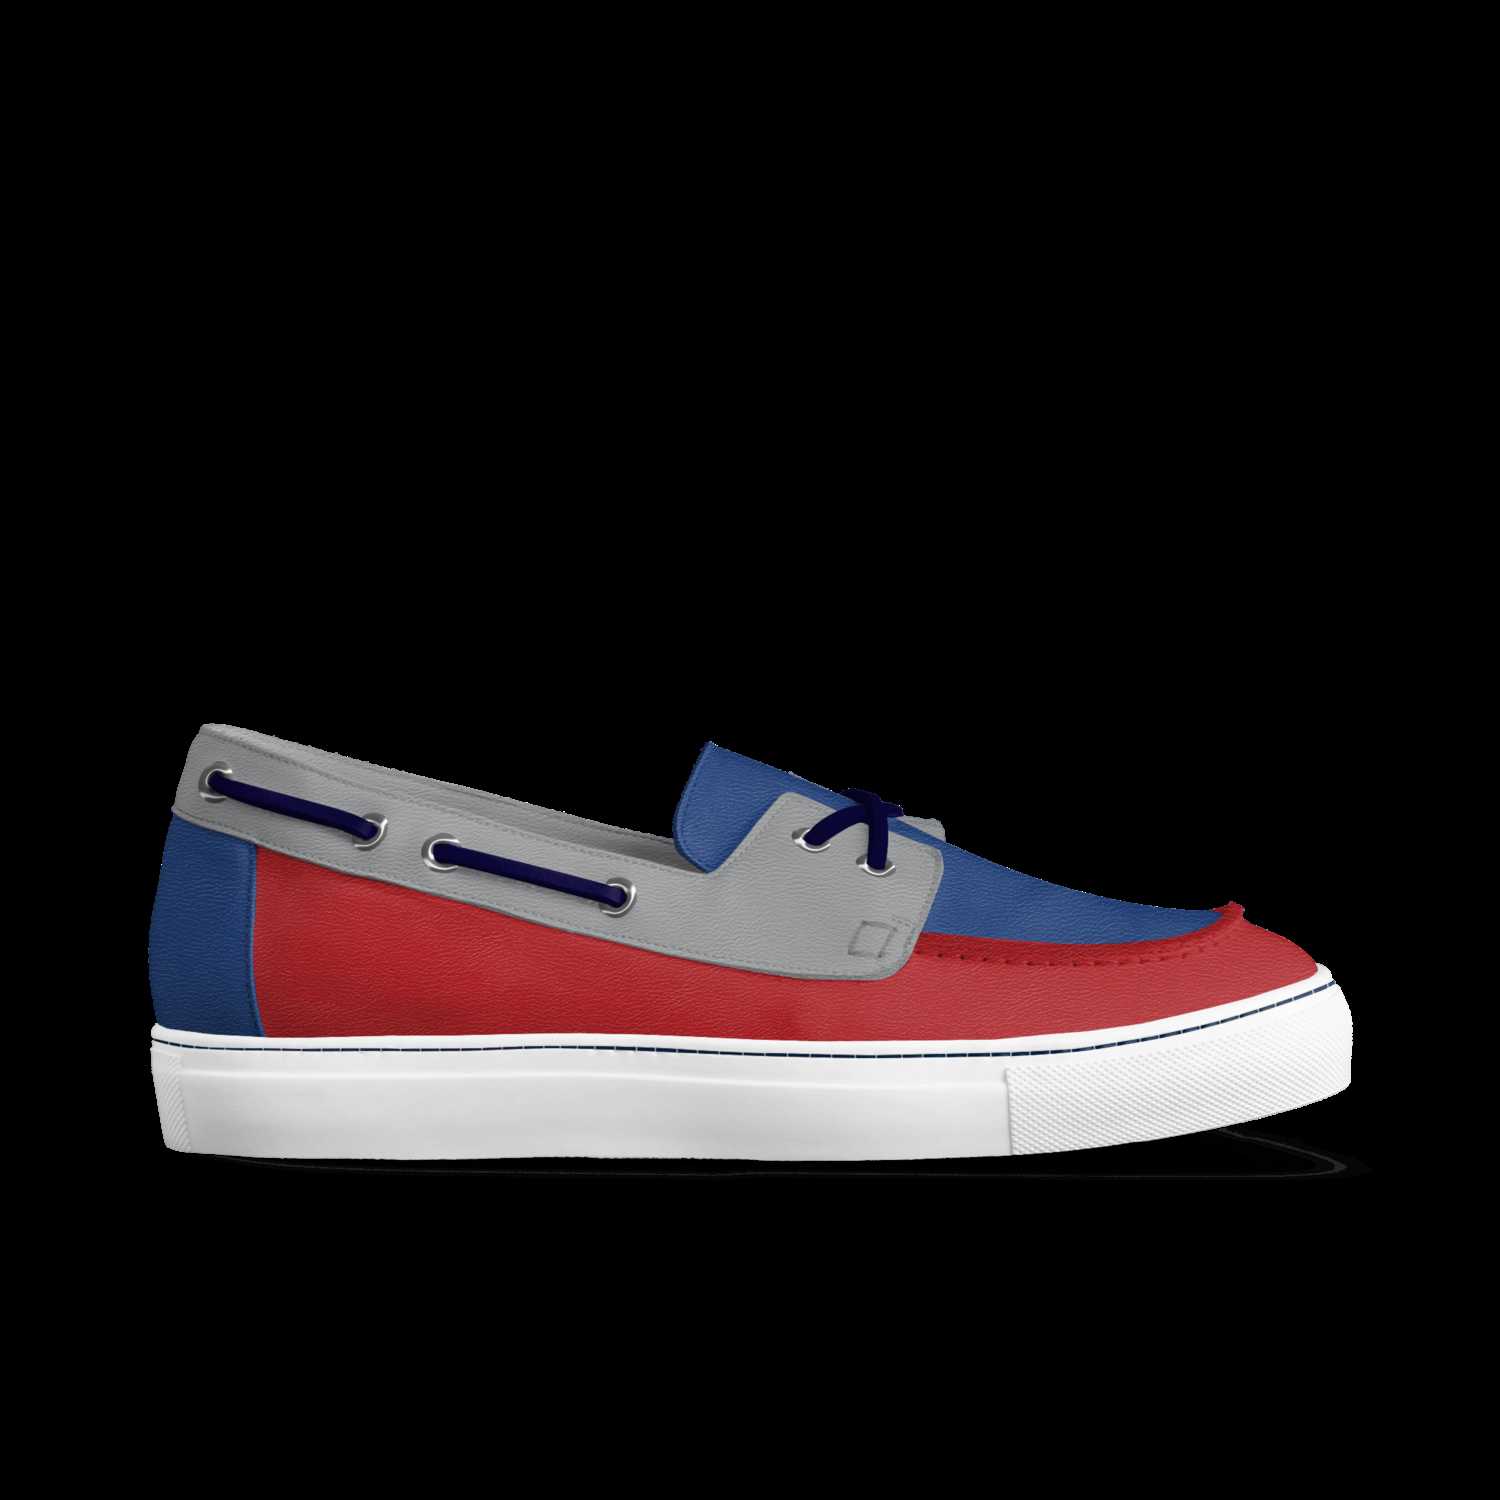 rivers casual shoes